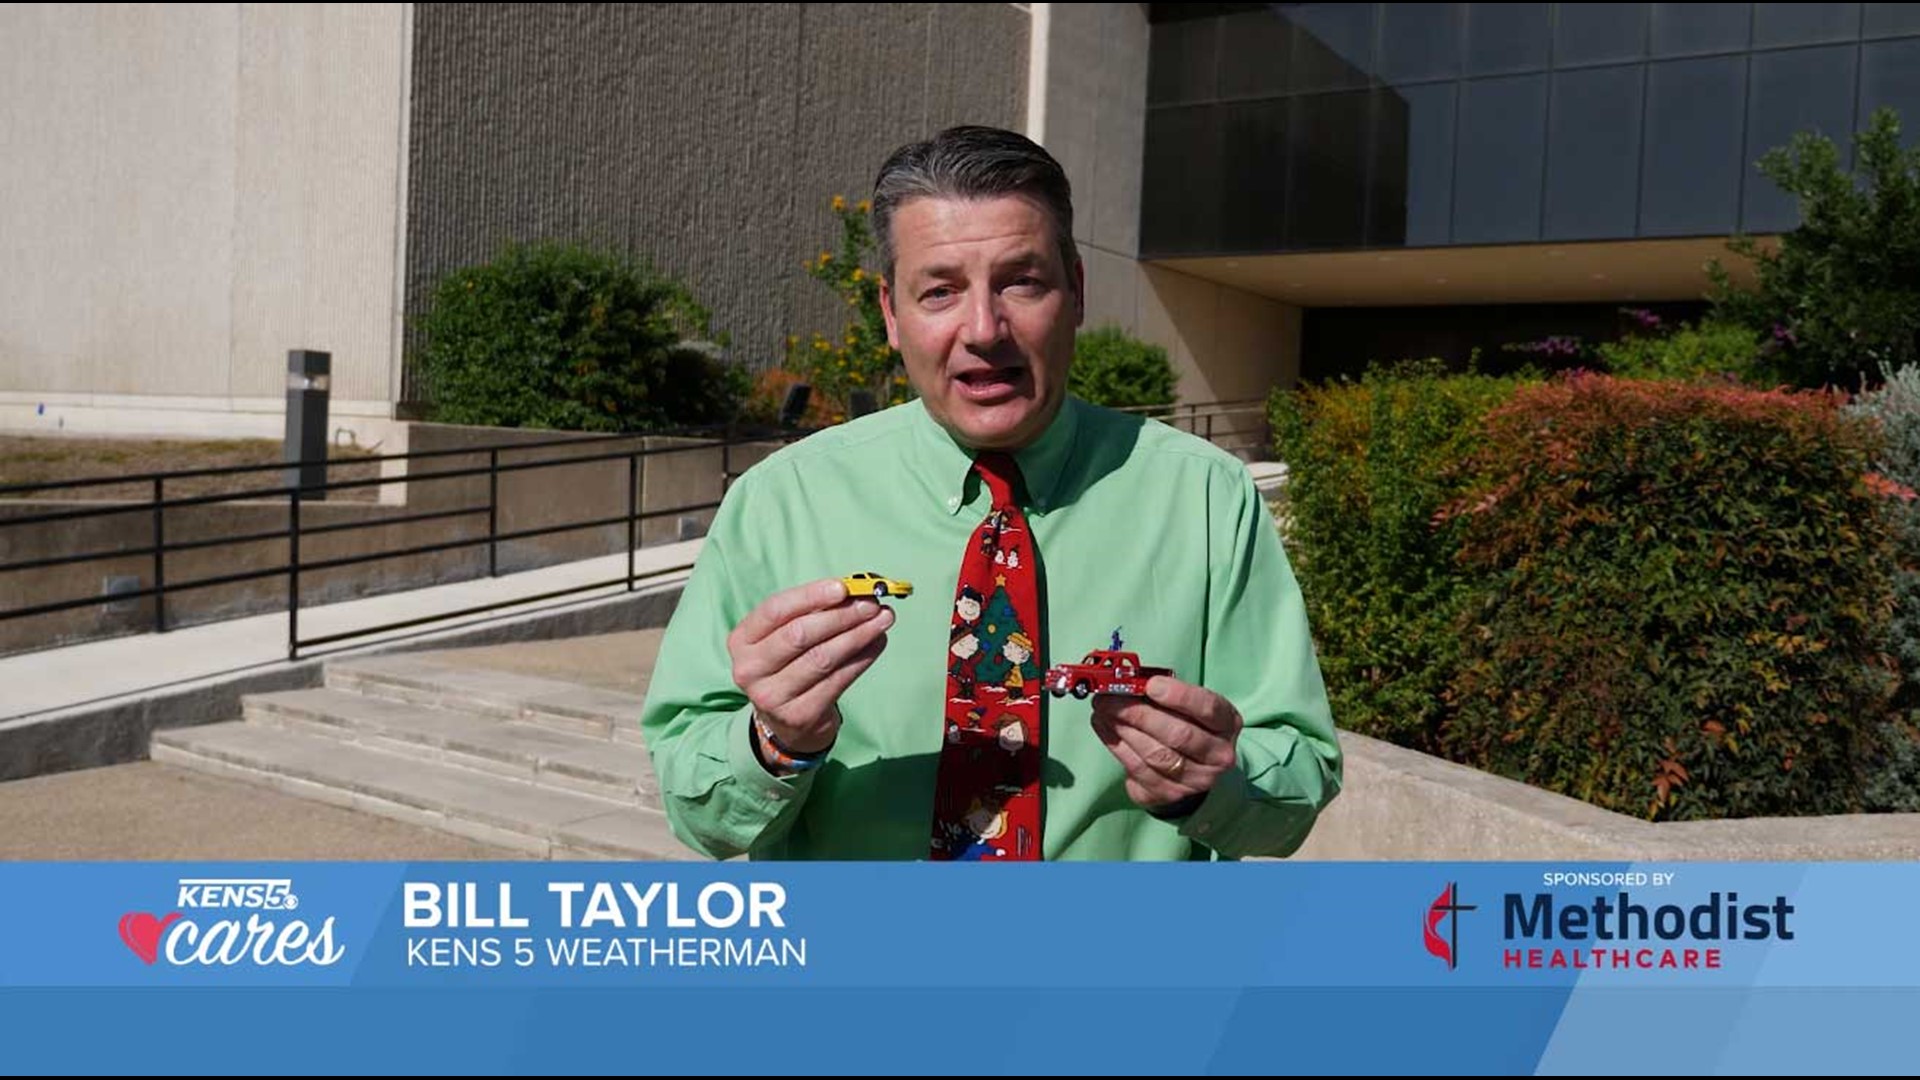 KENS 5's Bill Taylor says his favorite toys growing up were Hot Wheels! You can help create lasting memories for children in need this holiday season.